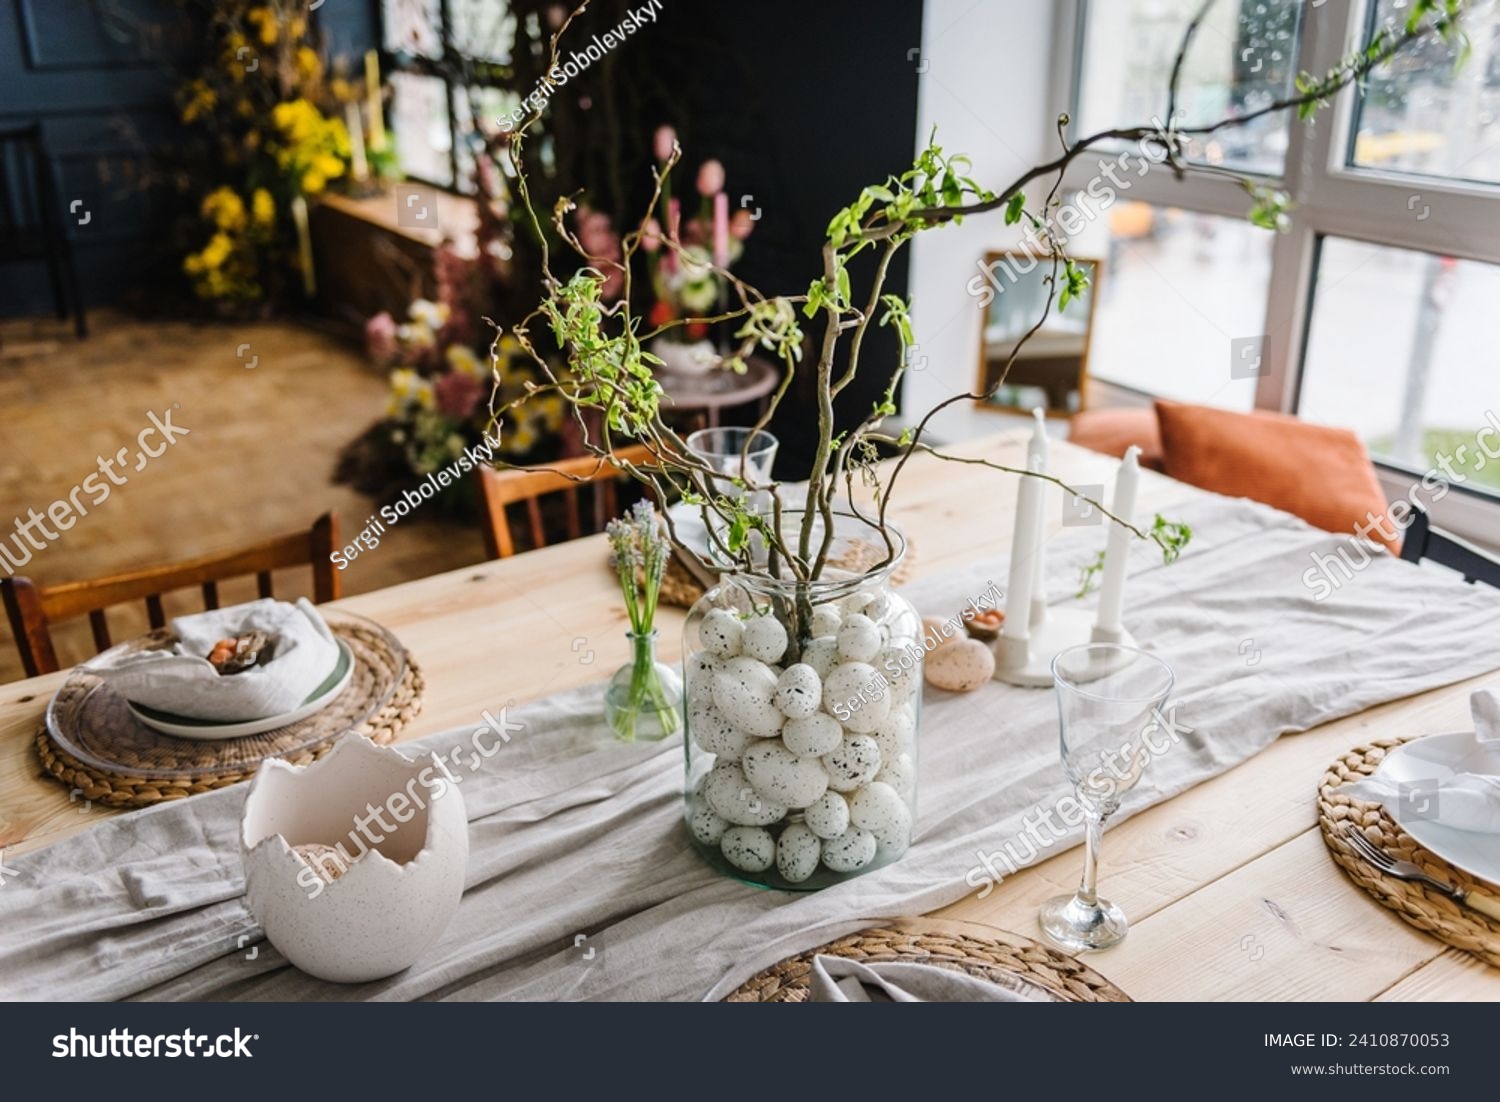 Easter decor closeup. Setting table for Easter dinner with candles, ceramic plates with easter eggs in nest, Easter bunny made of linen napkin. Holidays celebration concept. Side view. Set up. #2410870053